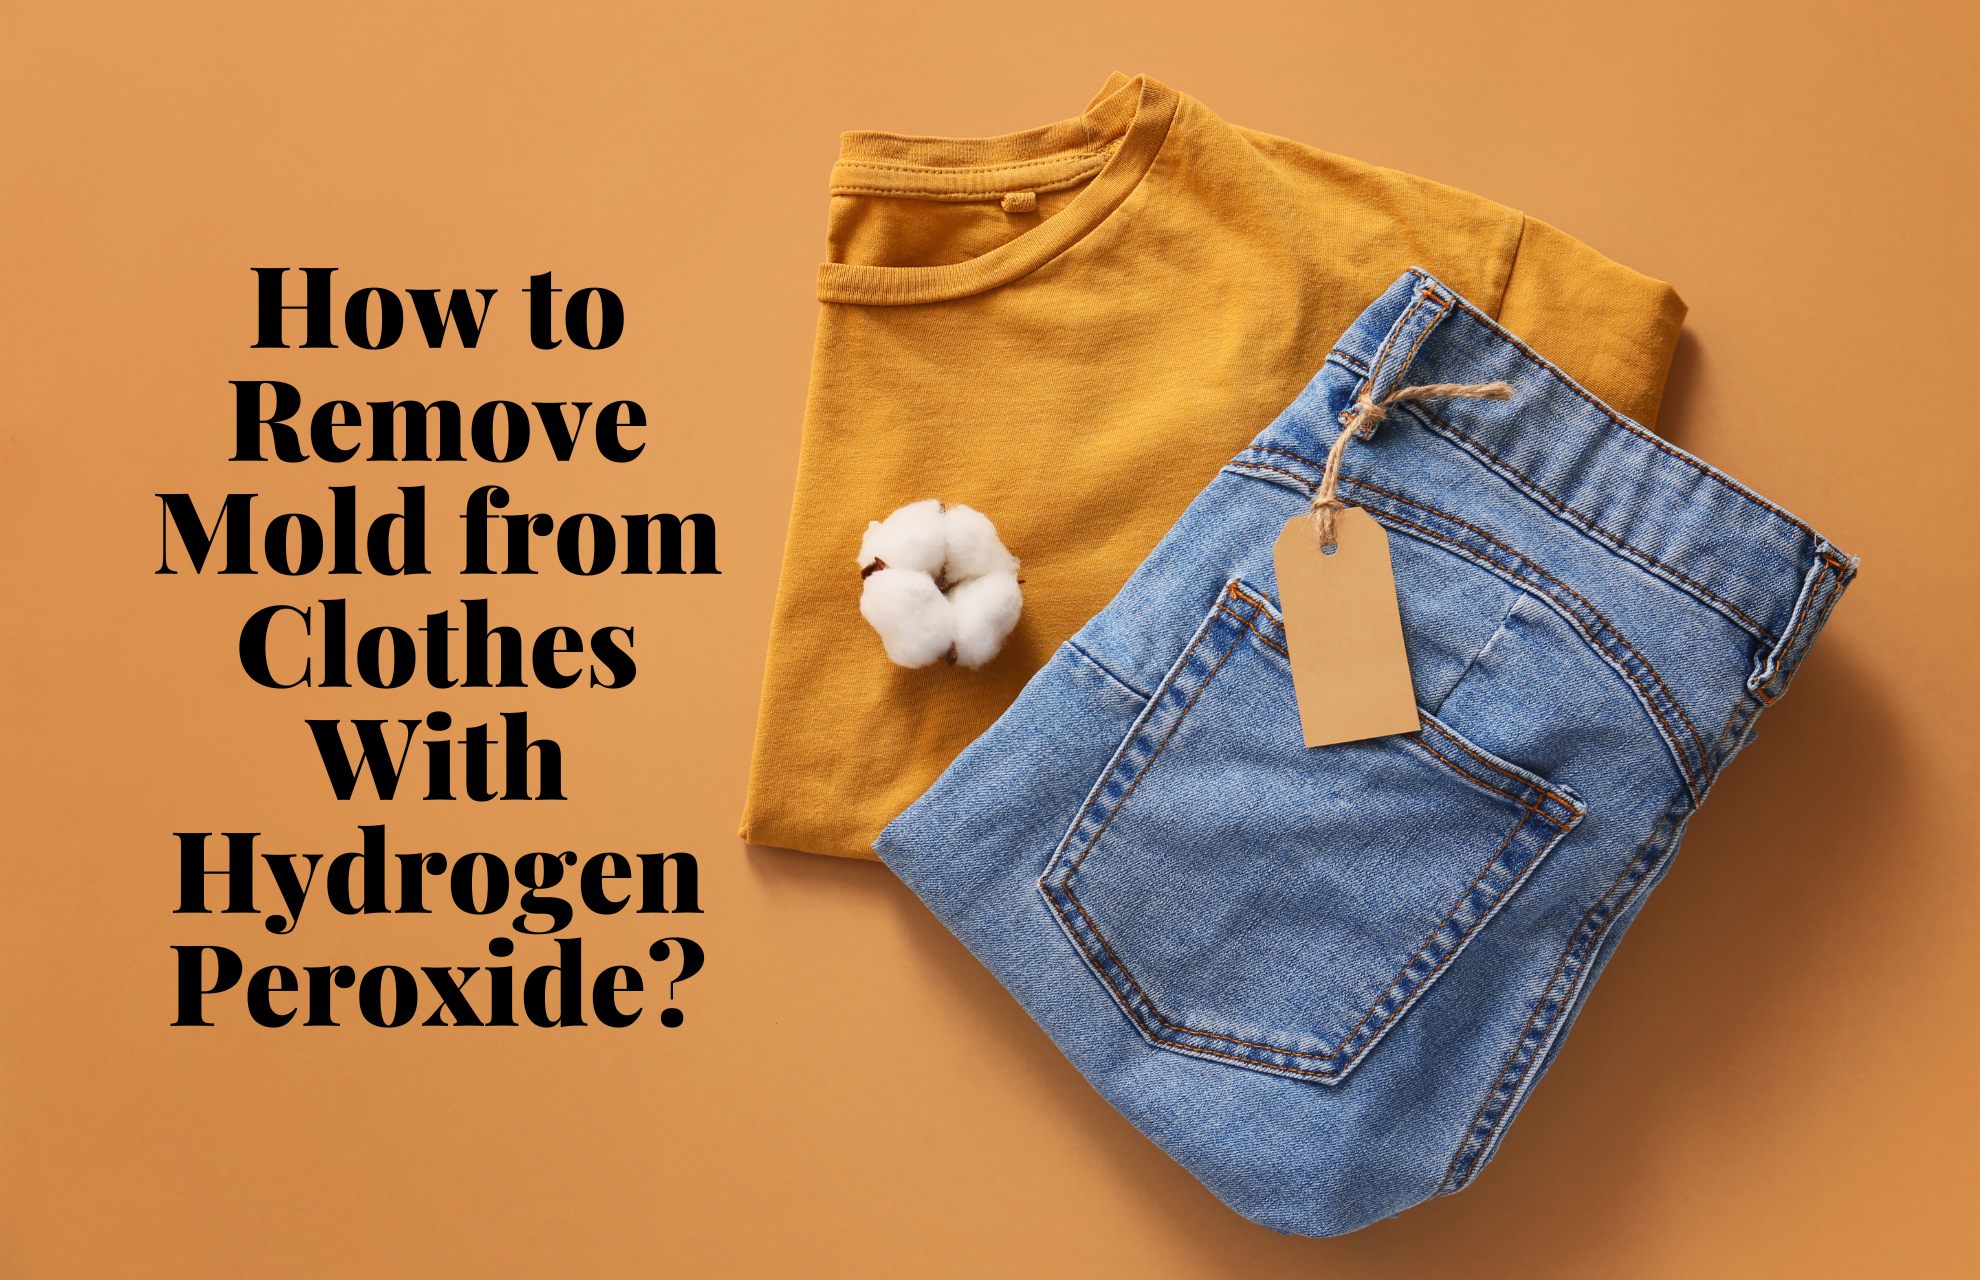 How to Remove Mold from Clothes With Hydrogen Peroxide?